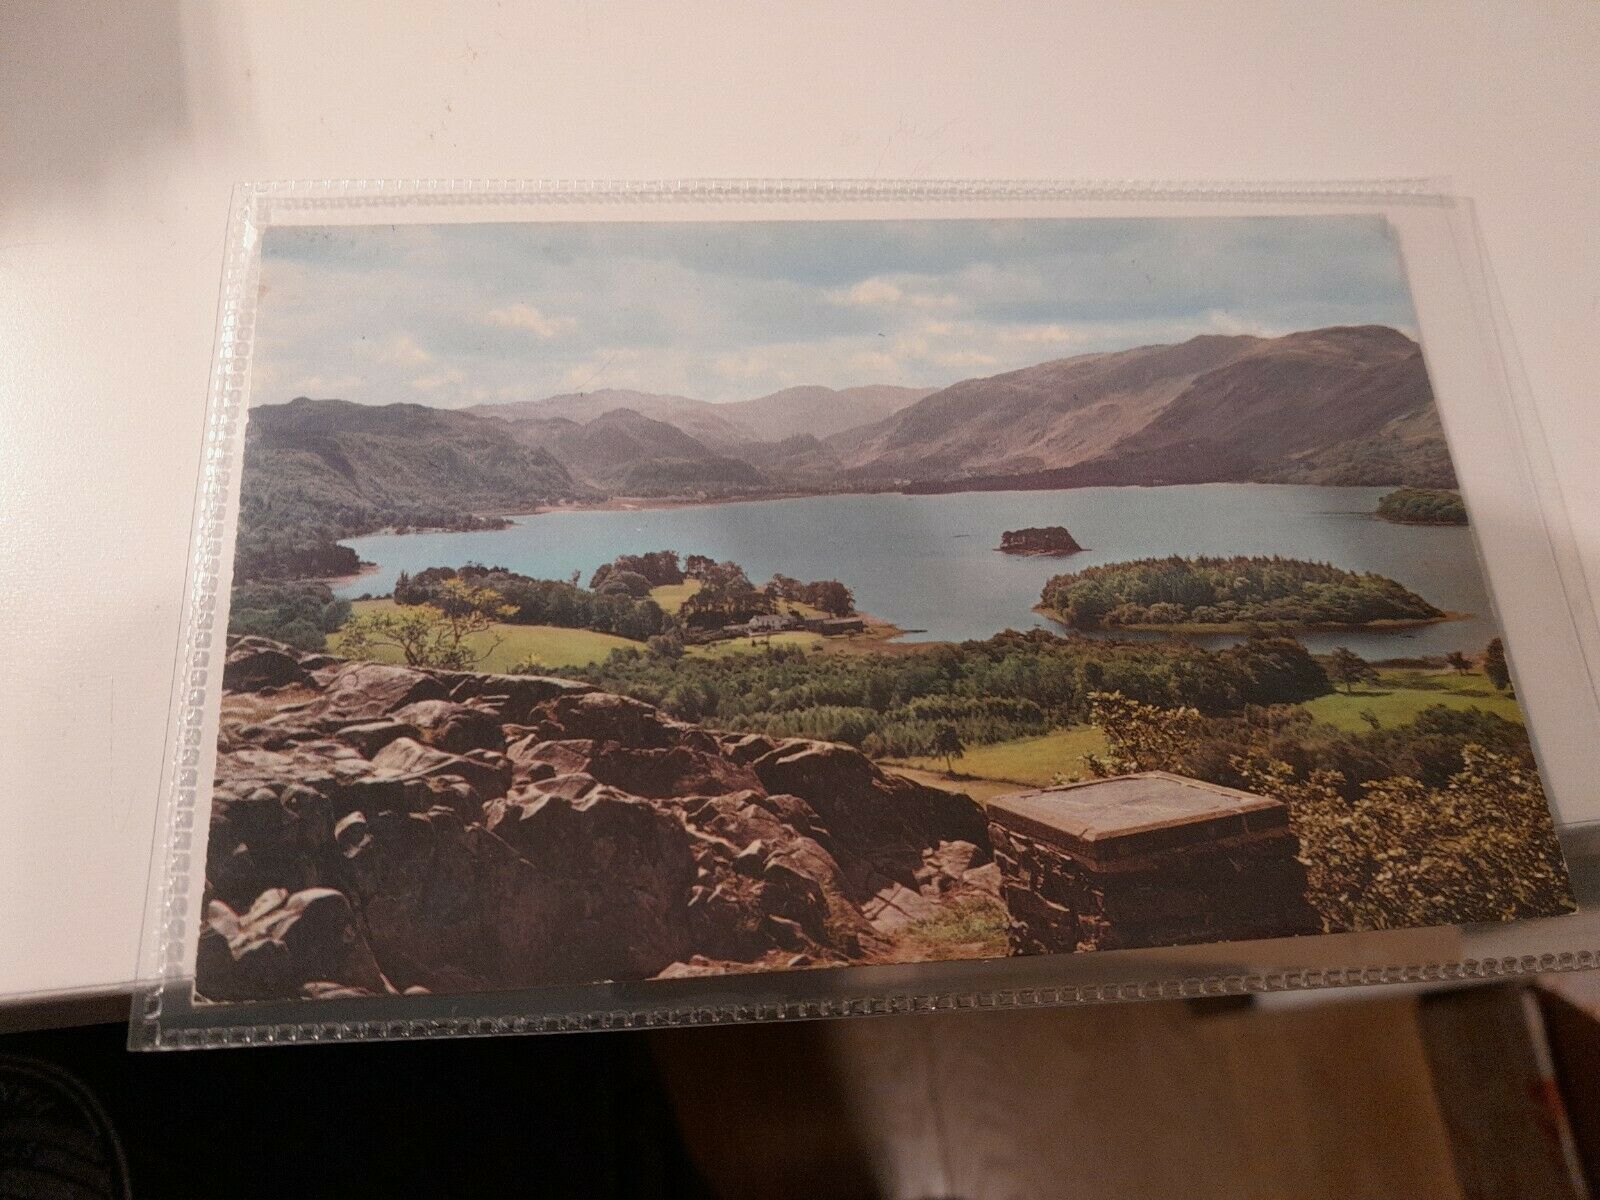 House Clearance - VINTAGE POSTCARD - DERWENTWATER FROM CASTLE HEAD - KESWICK - CUMBERLAND